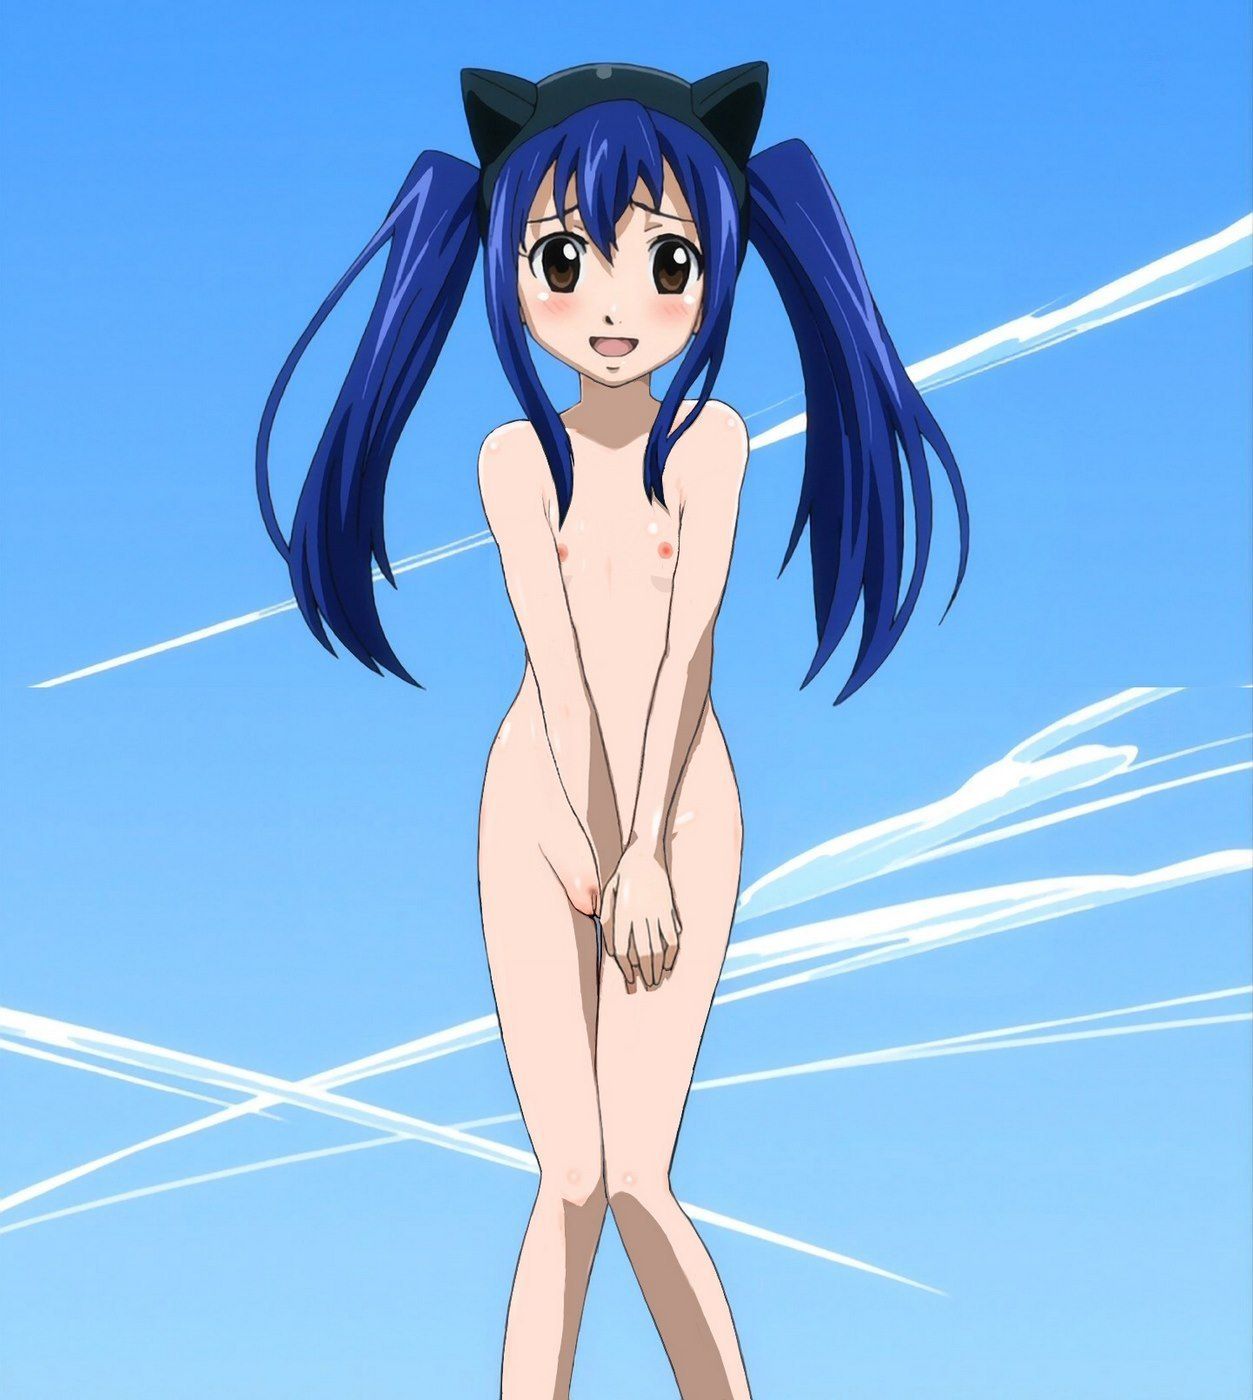 [Twinterolli] FAIRY Tail of the series also ended and Lori daughter Wendy Marvel erotic image of her? 35